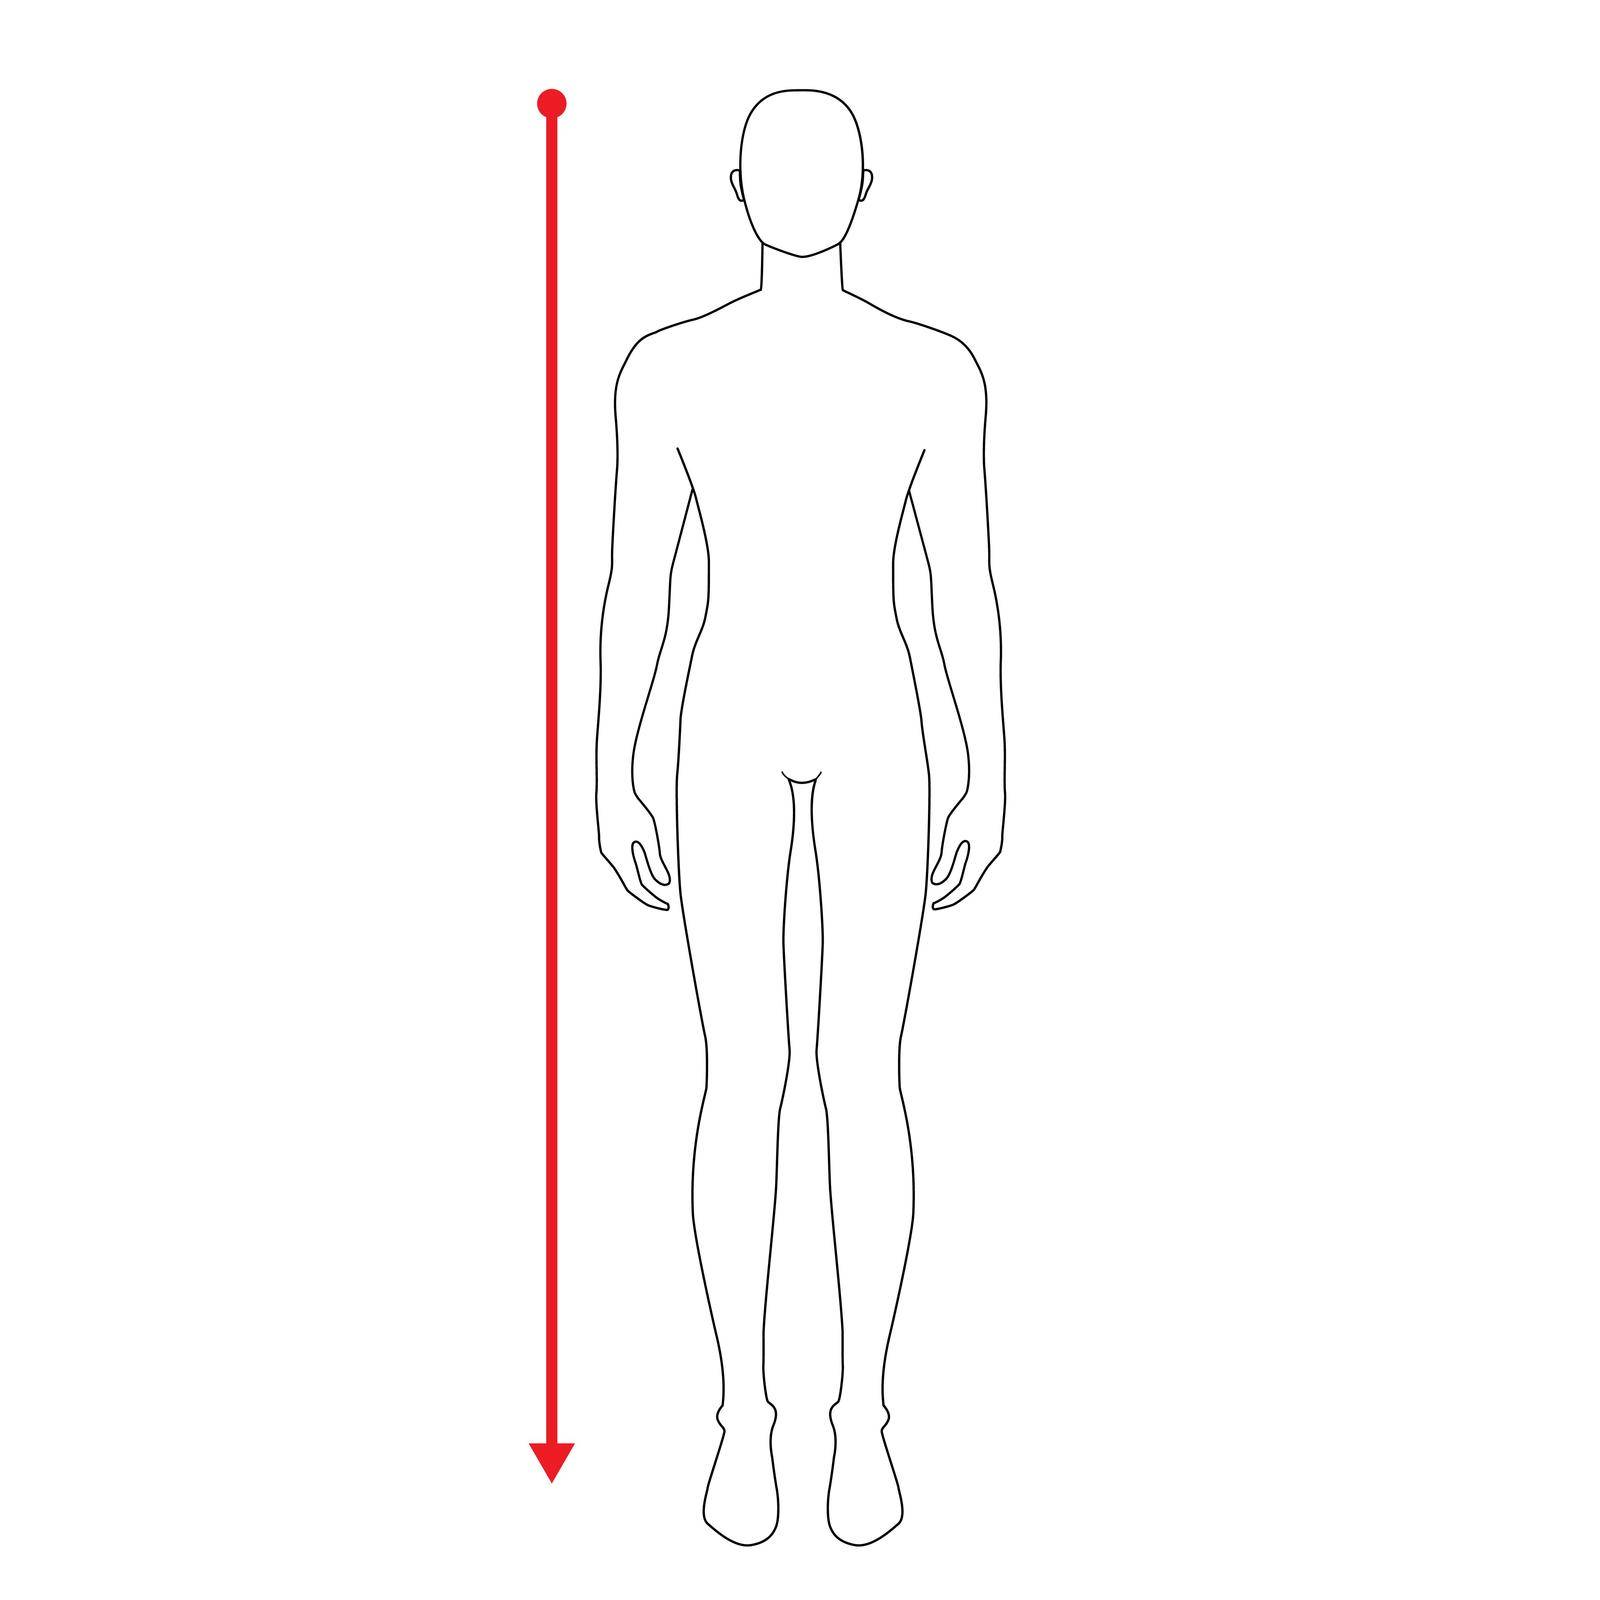 Men to do height measurement fashion Illustration for size chart. 7.5 head size boy for site or online shop. Human body infographic template for clothes.